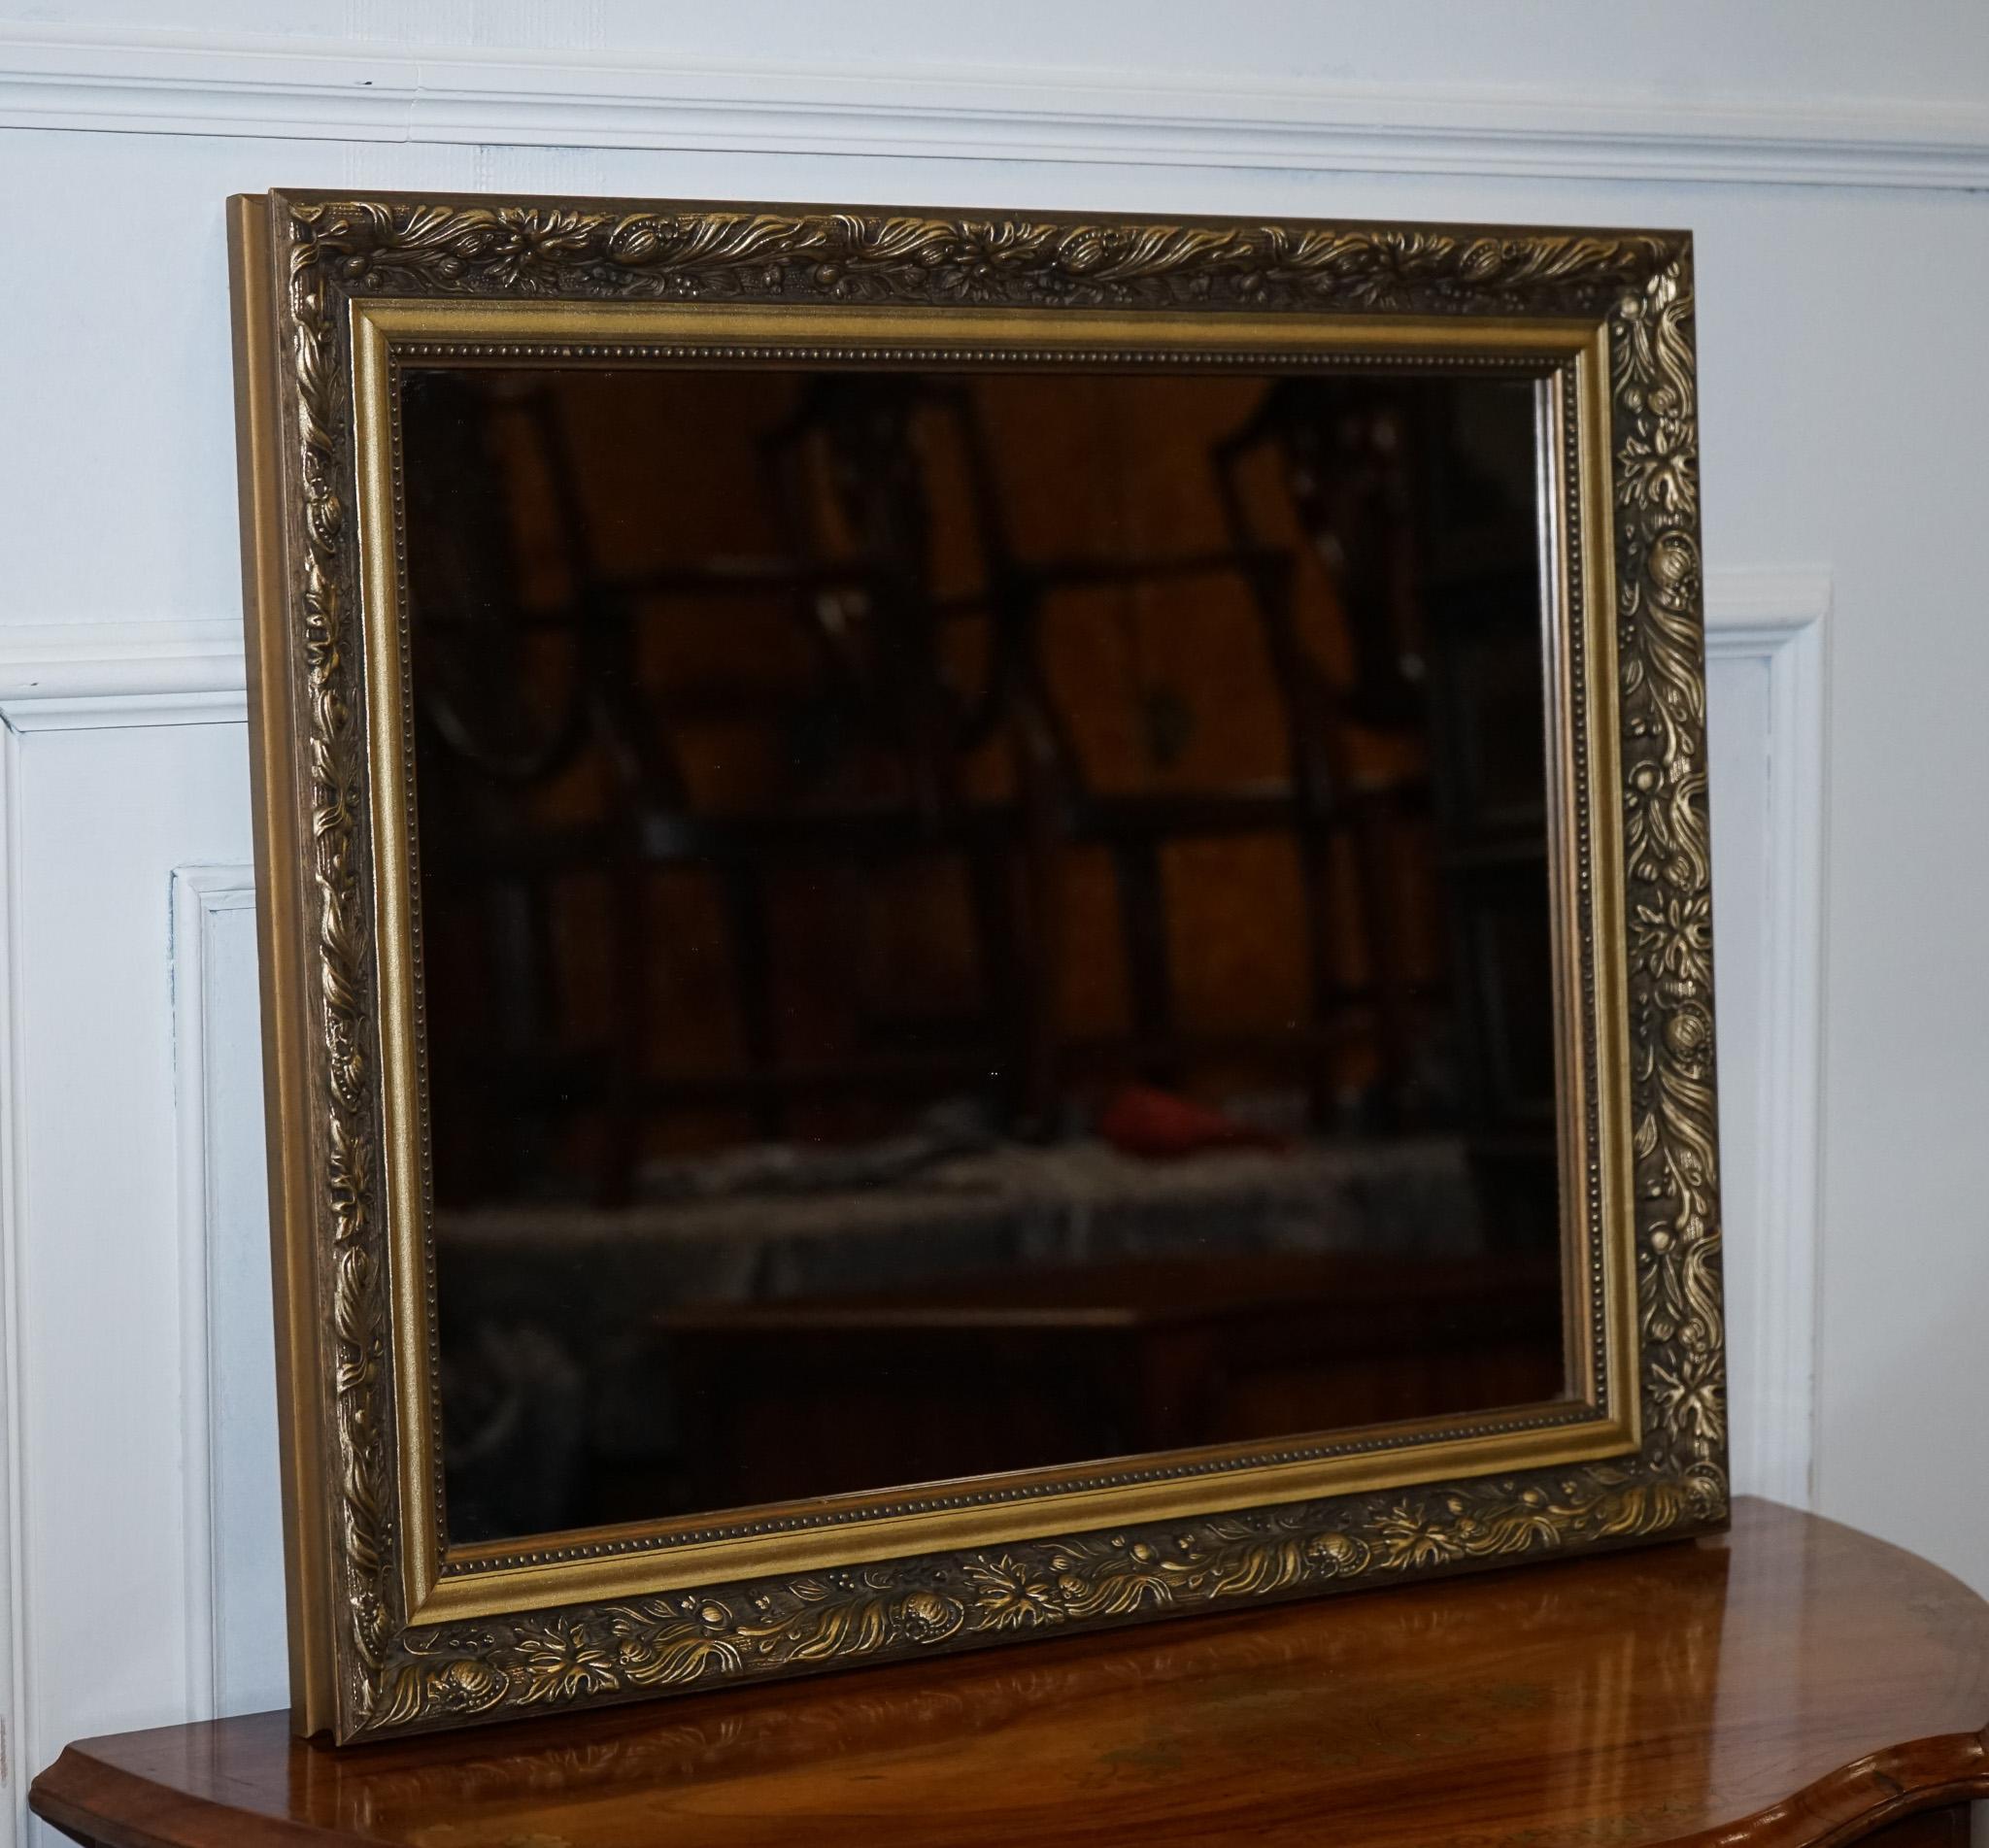 
We are delighted to offer for sale this Lovely Gold Ornate Bevelled Mirror.

A Vintage Gold Ornate Bevelled Wall Mirror is a beautifully crafted and elegant piece of decor that adds a touch of vintage glamour to any room. This particular mirror